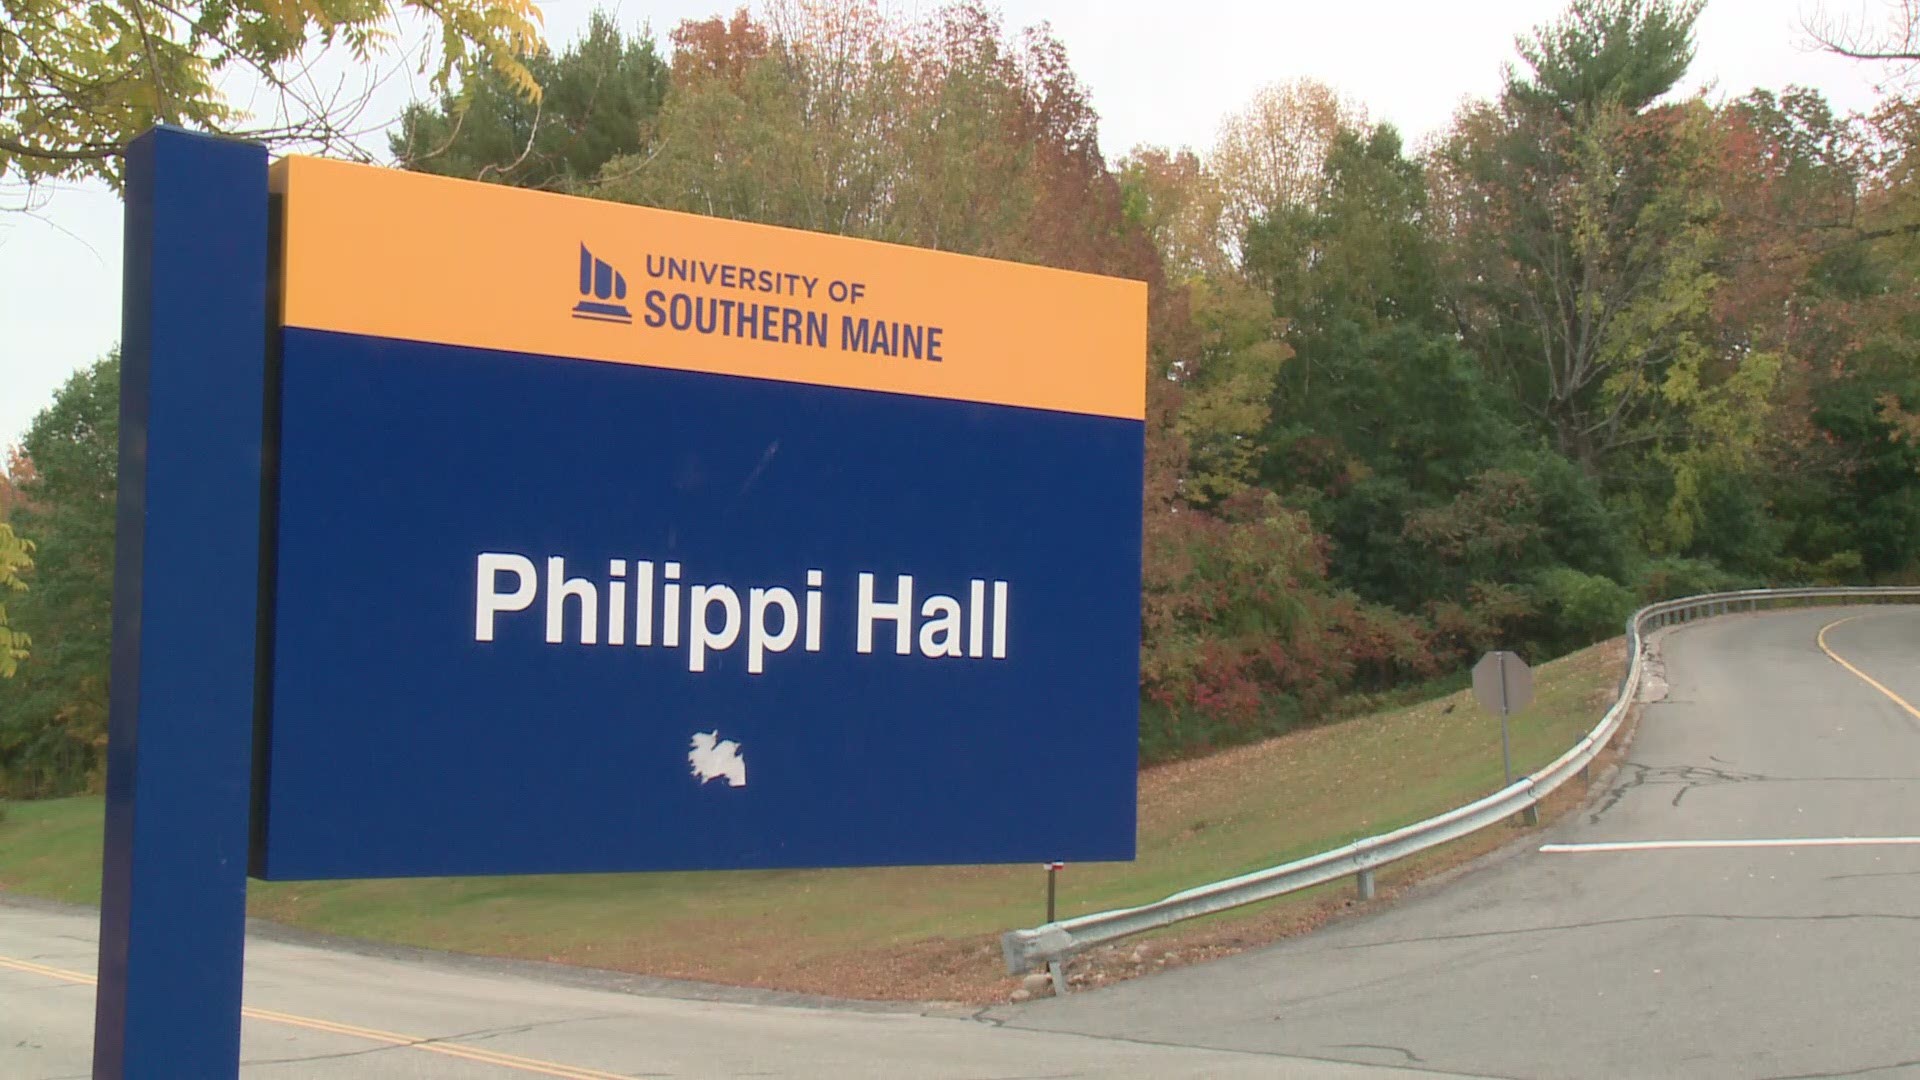 University of Southern Maine campus in Portland